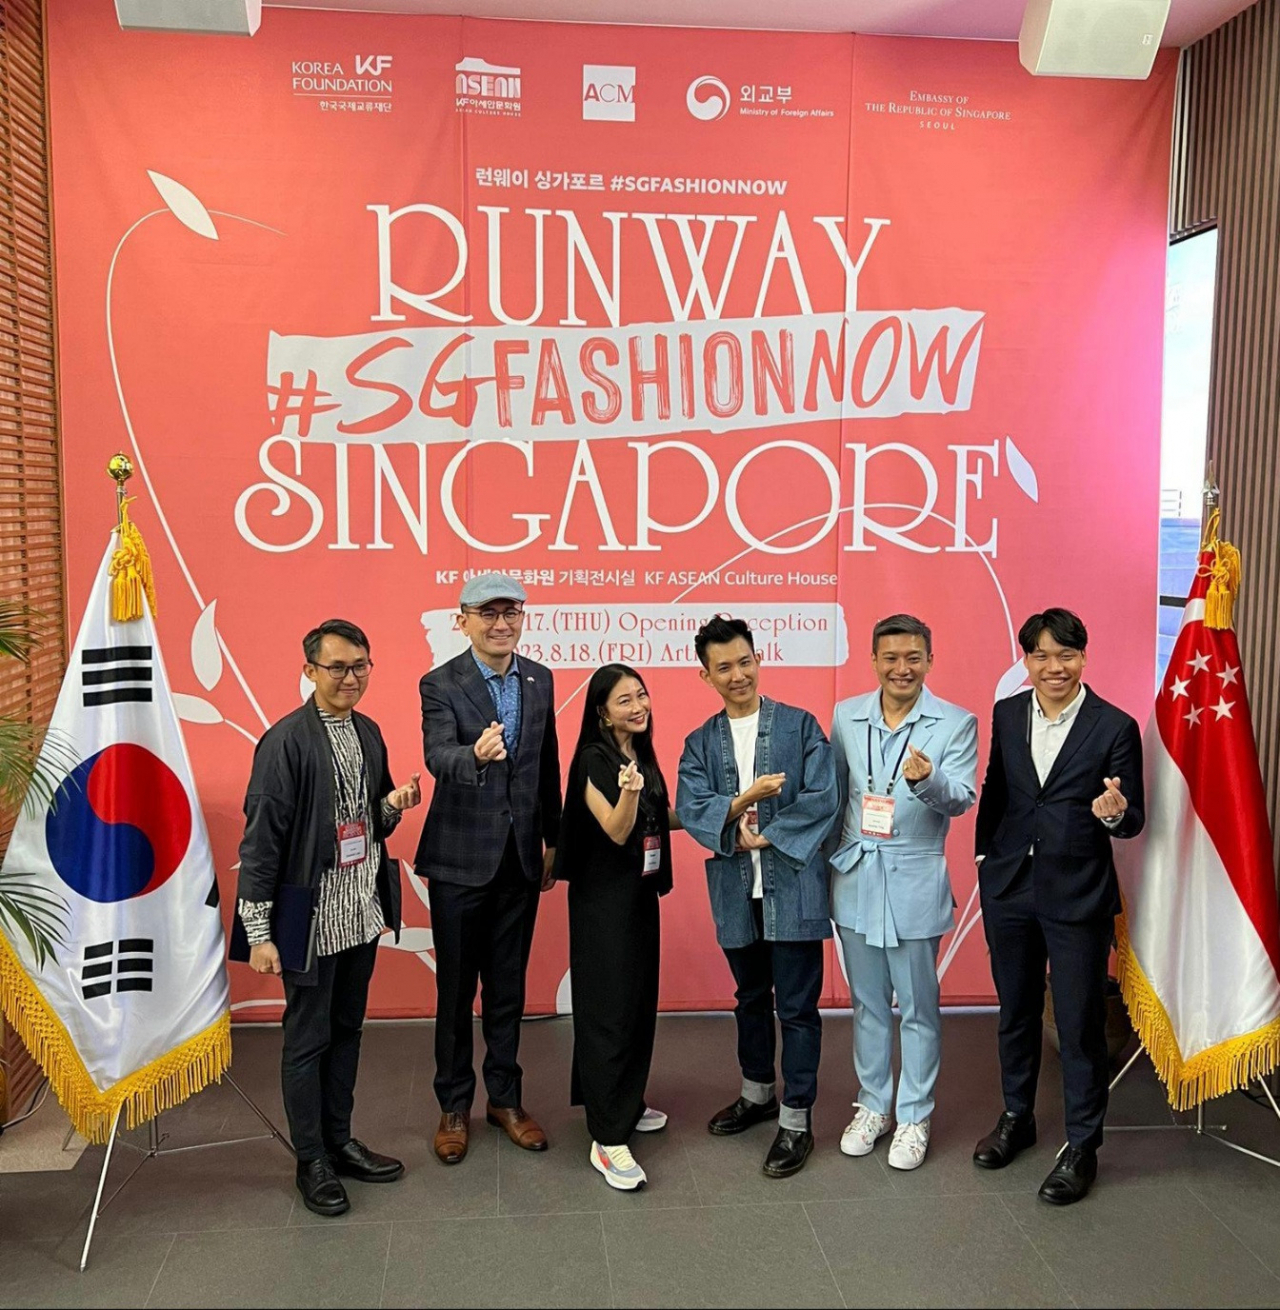 Singaporean Ambassador to Korea Eric Teo(second from left) poses with attendees for a group photo at the #SGFASHIONNOW event at KF ASEAN Culture House in Busan. (Embassy of Singapore in Seoul)